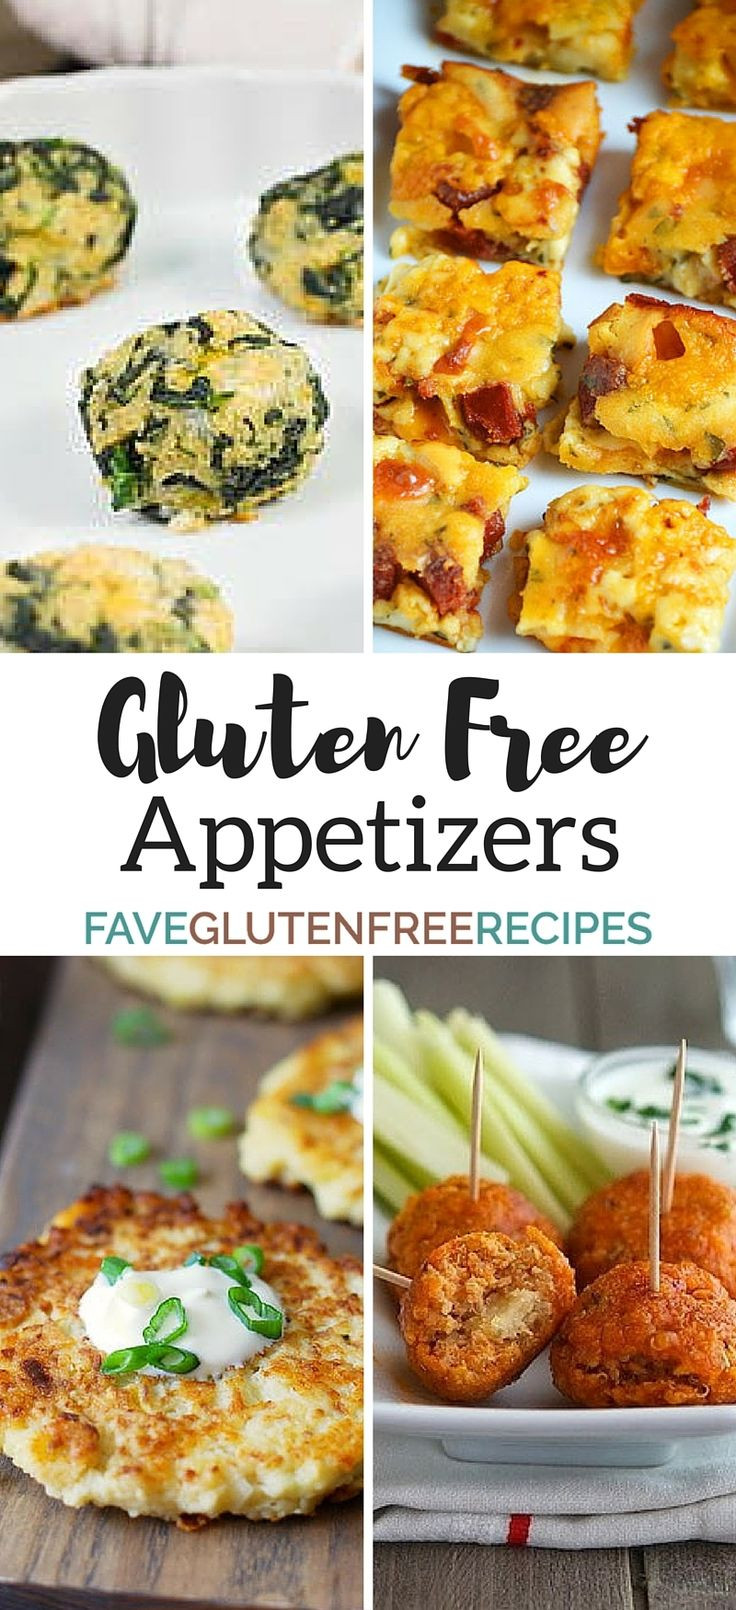 Gluten Free And Dairy Free Appetizers
 Best 147 Gluten Free Appetizers images on Pinterest